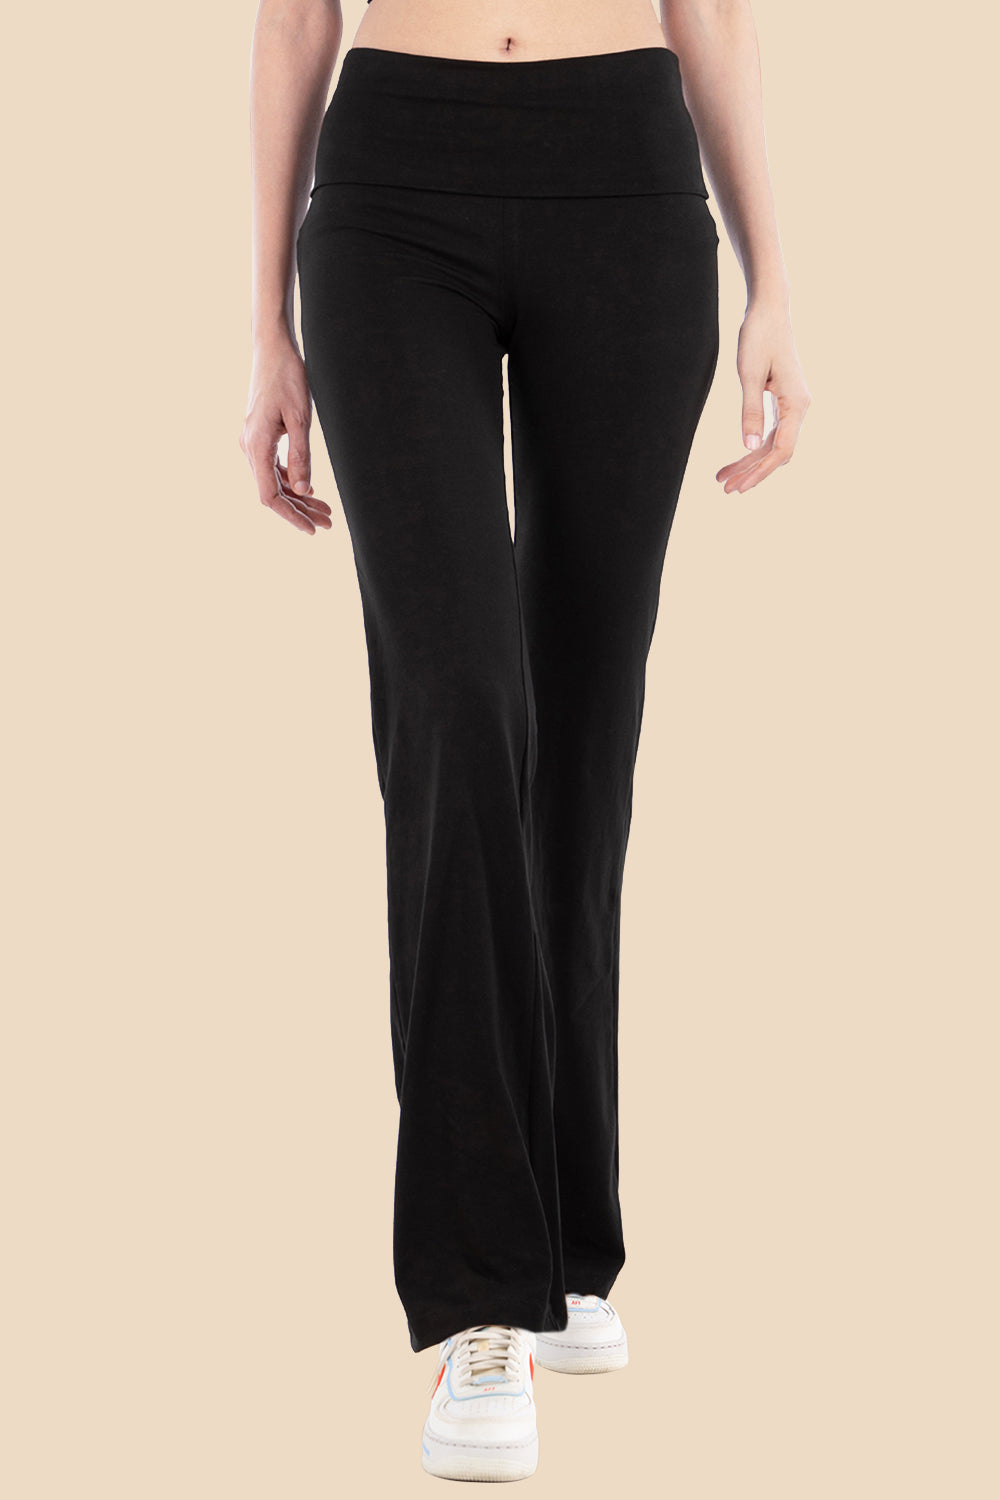 Black Yoga Pants, For Casual Wear at Rs 300 in New Delhi